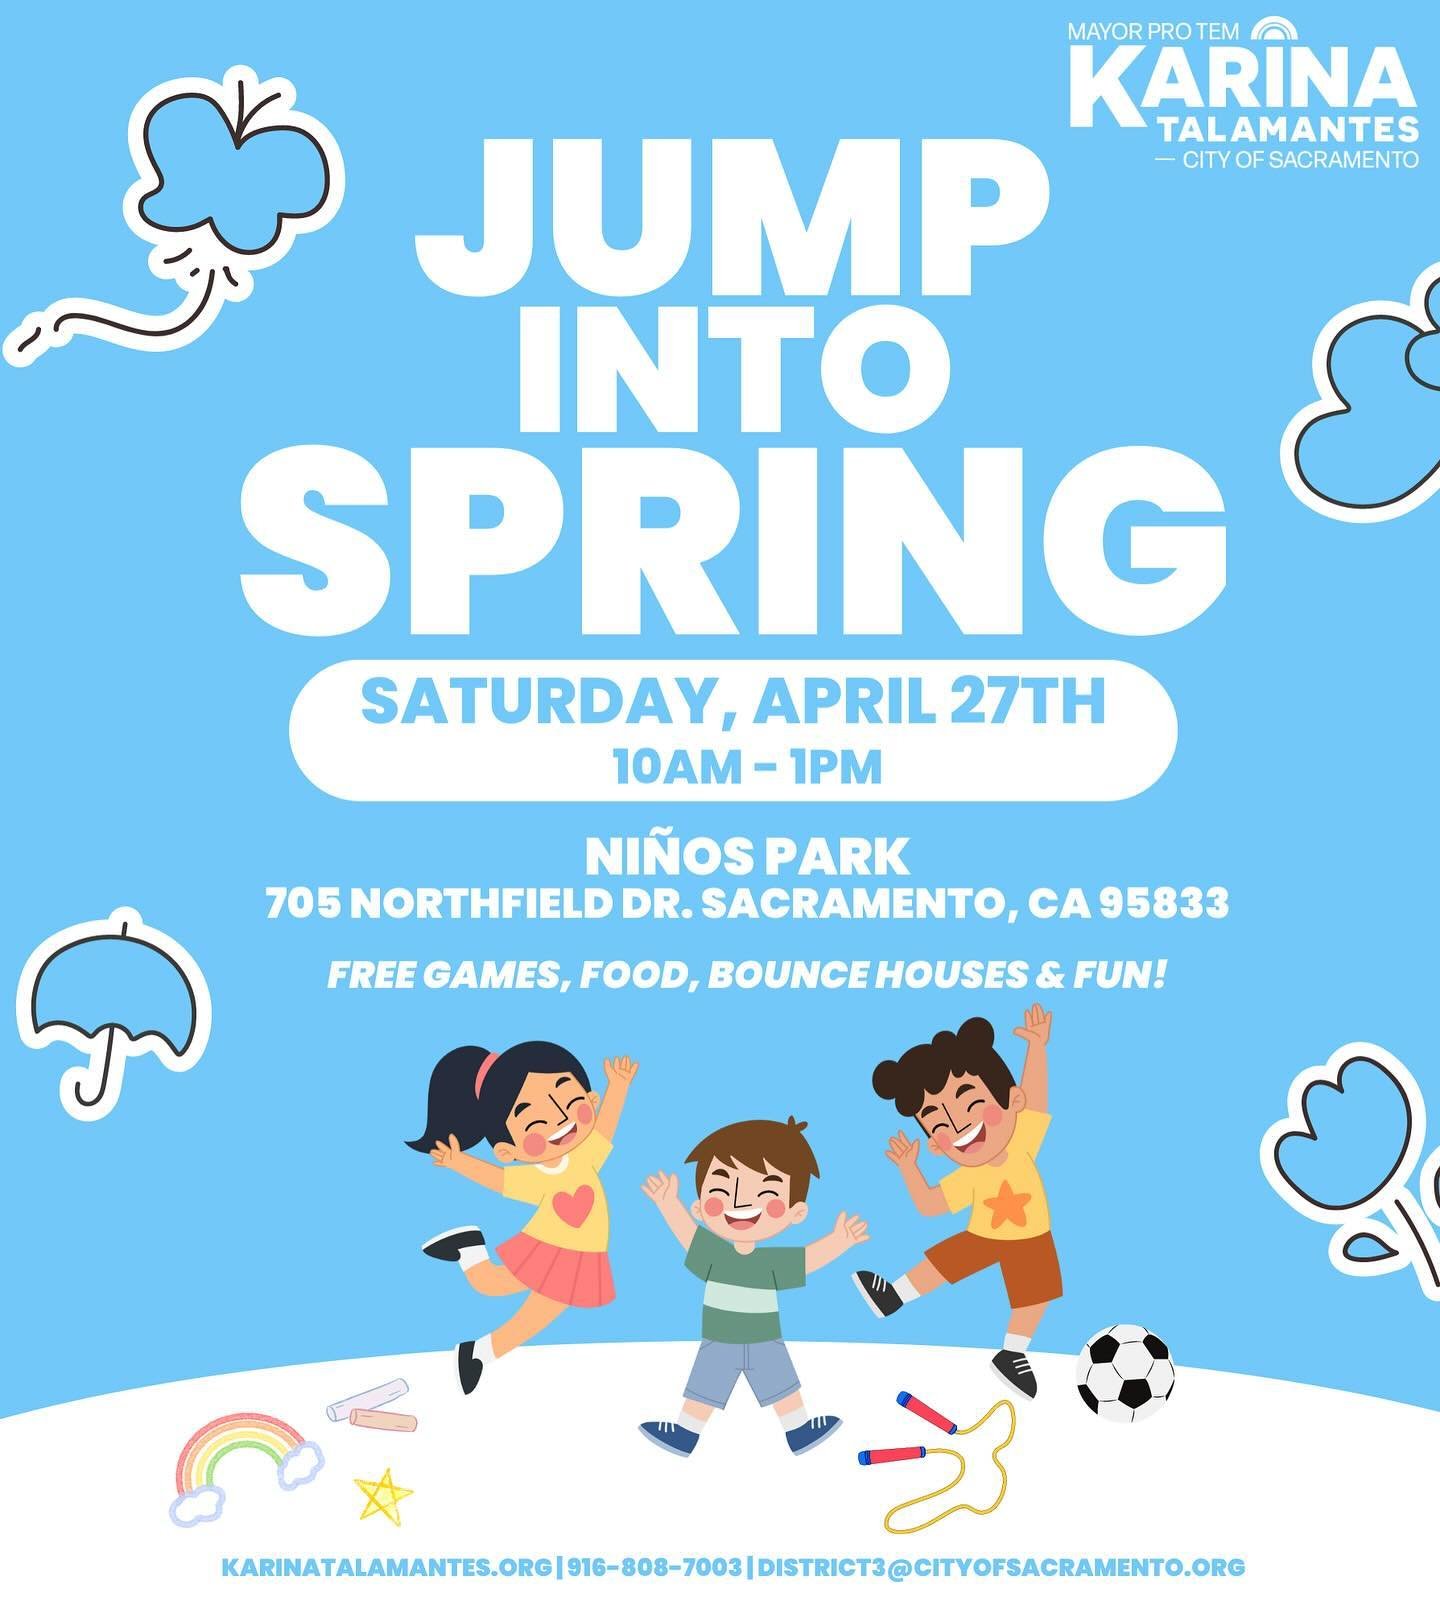 Mayor Pro Tem Karina Talamantes is hosting the 2nd Annual Jump into Spring! This fun and free event includes games, bounce houses, food, activities, prizes and more! ⚽️🎈🌭